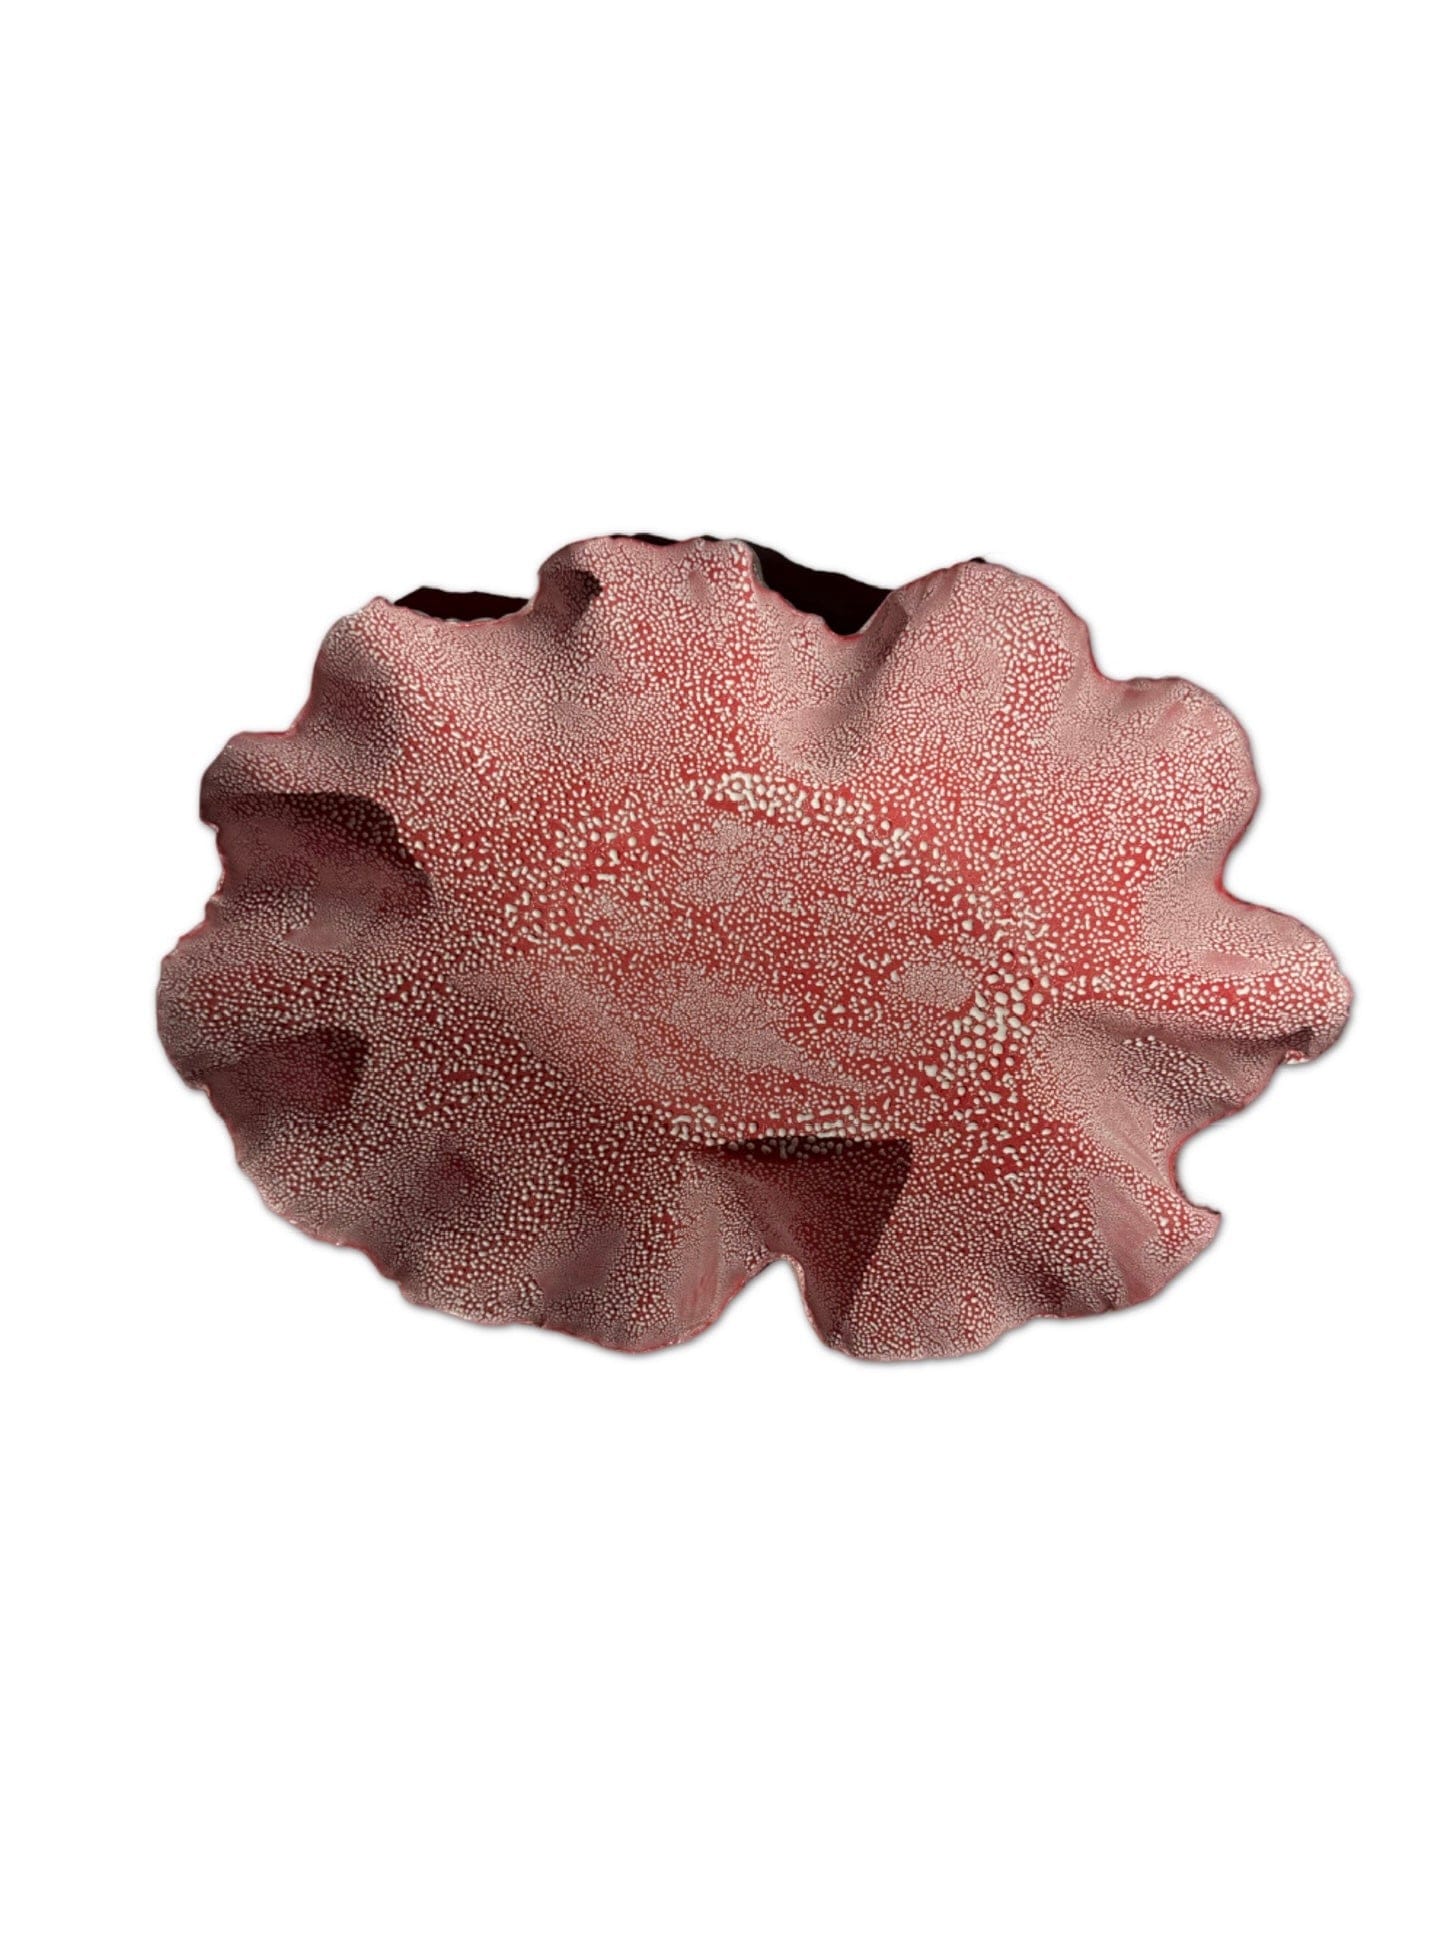 Nathalee Paolinelli Nathalee Paolinelli -Keep Sake Bowl Long Red With White Lichen La Bomba Floristry Vancouver Canada